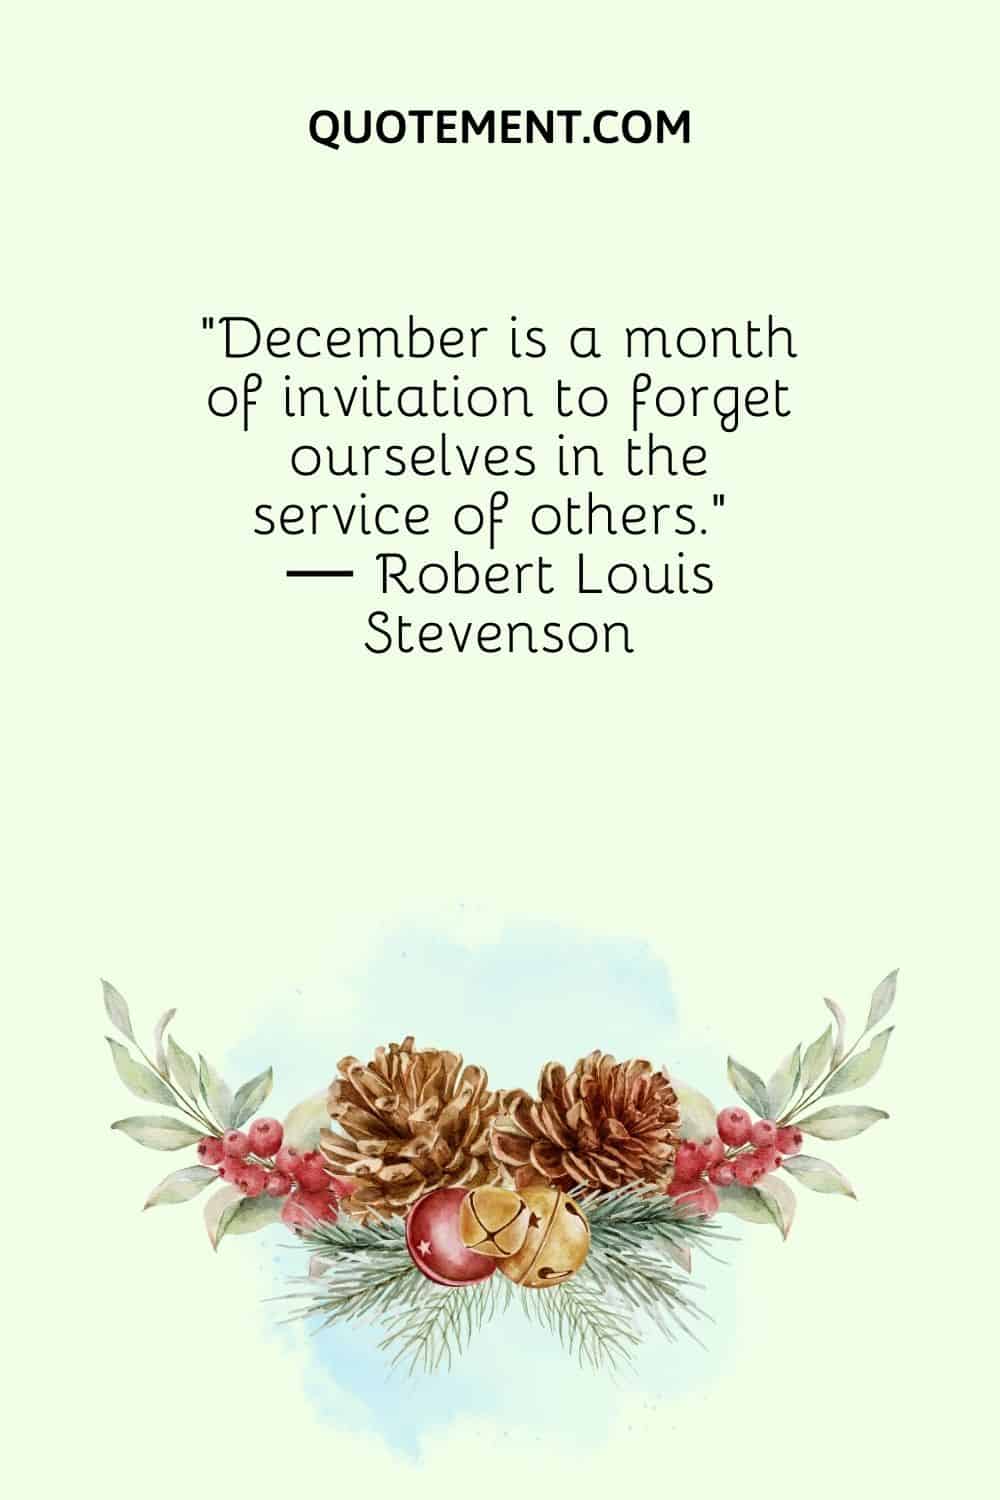 “December is a month of invitation to forget ourselves in the service of others.” ― Robert Louis Stevenson